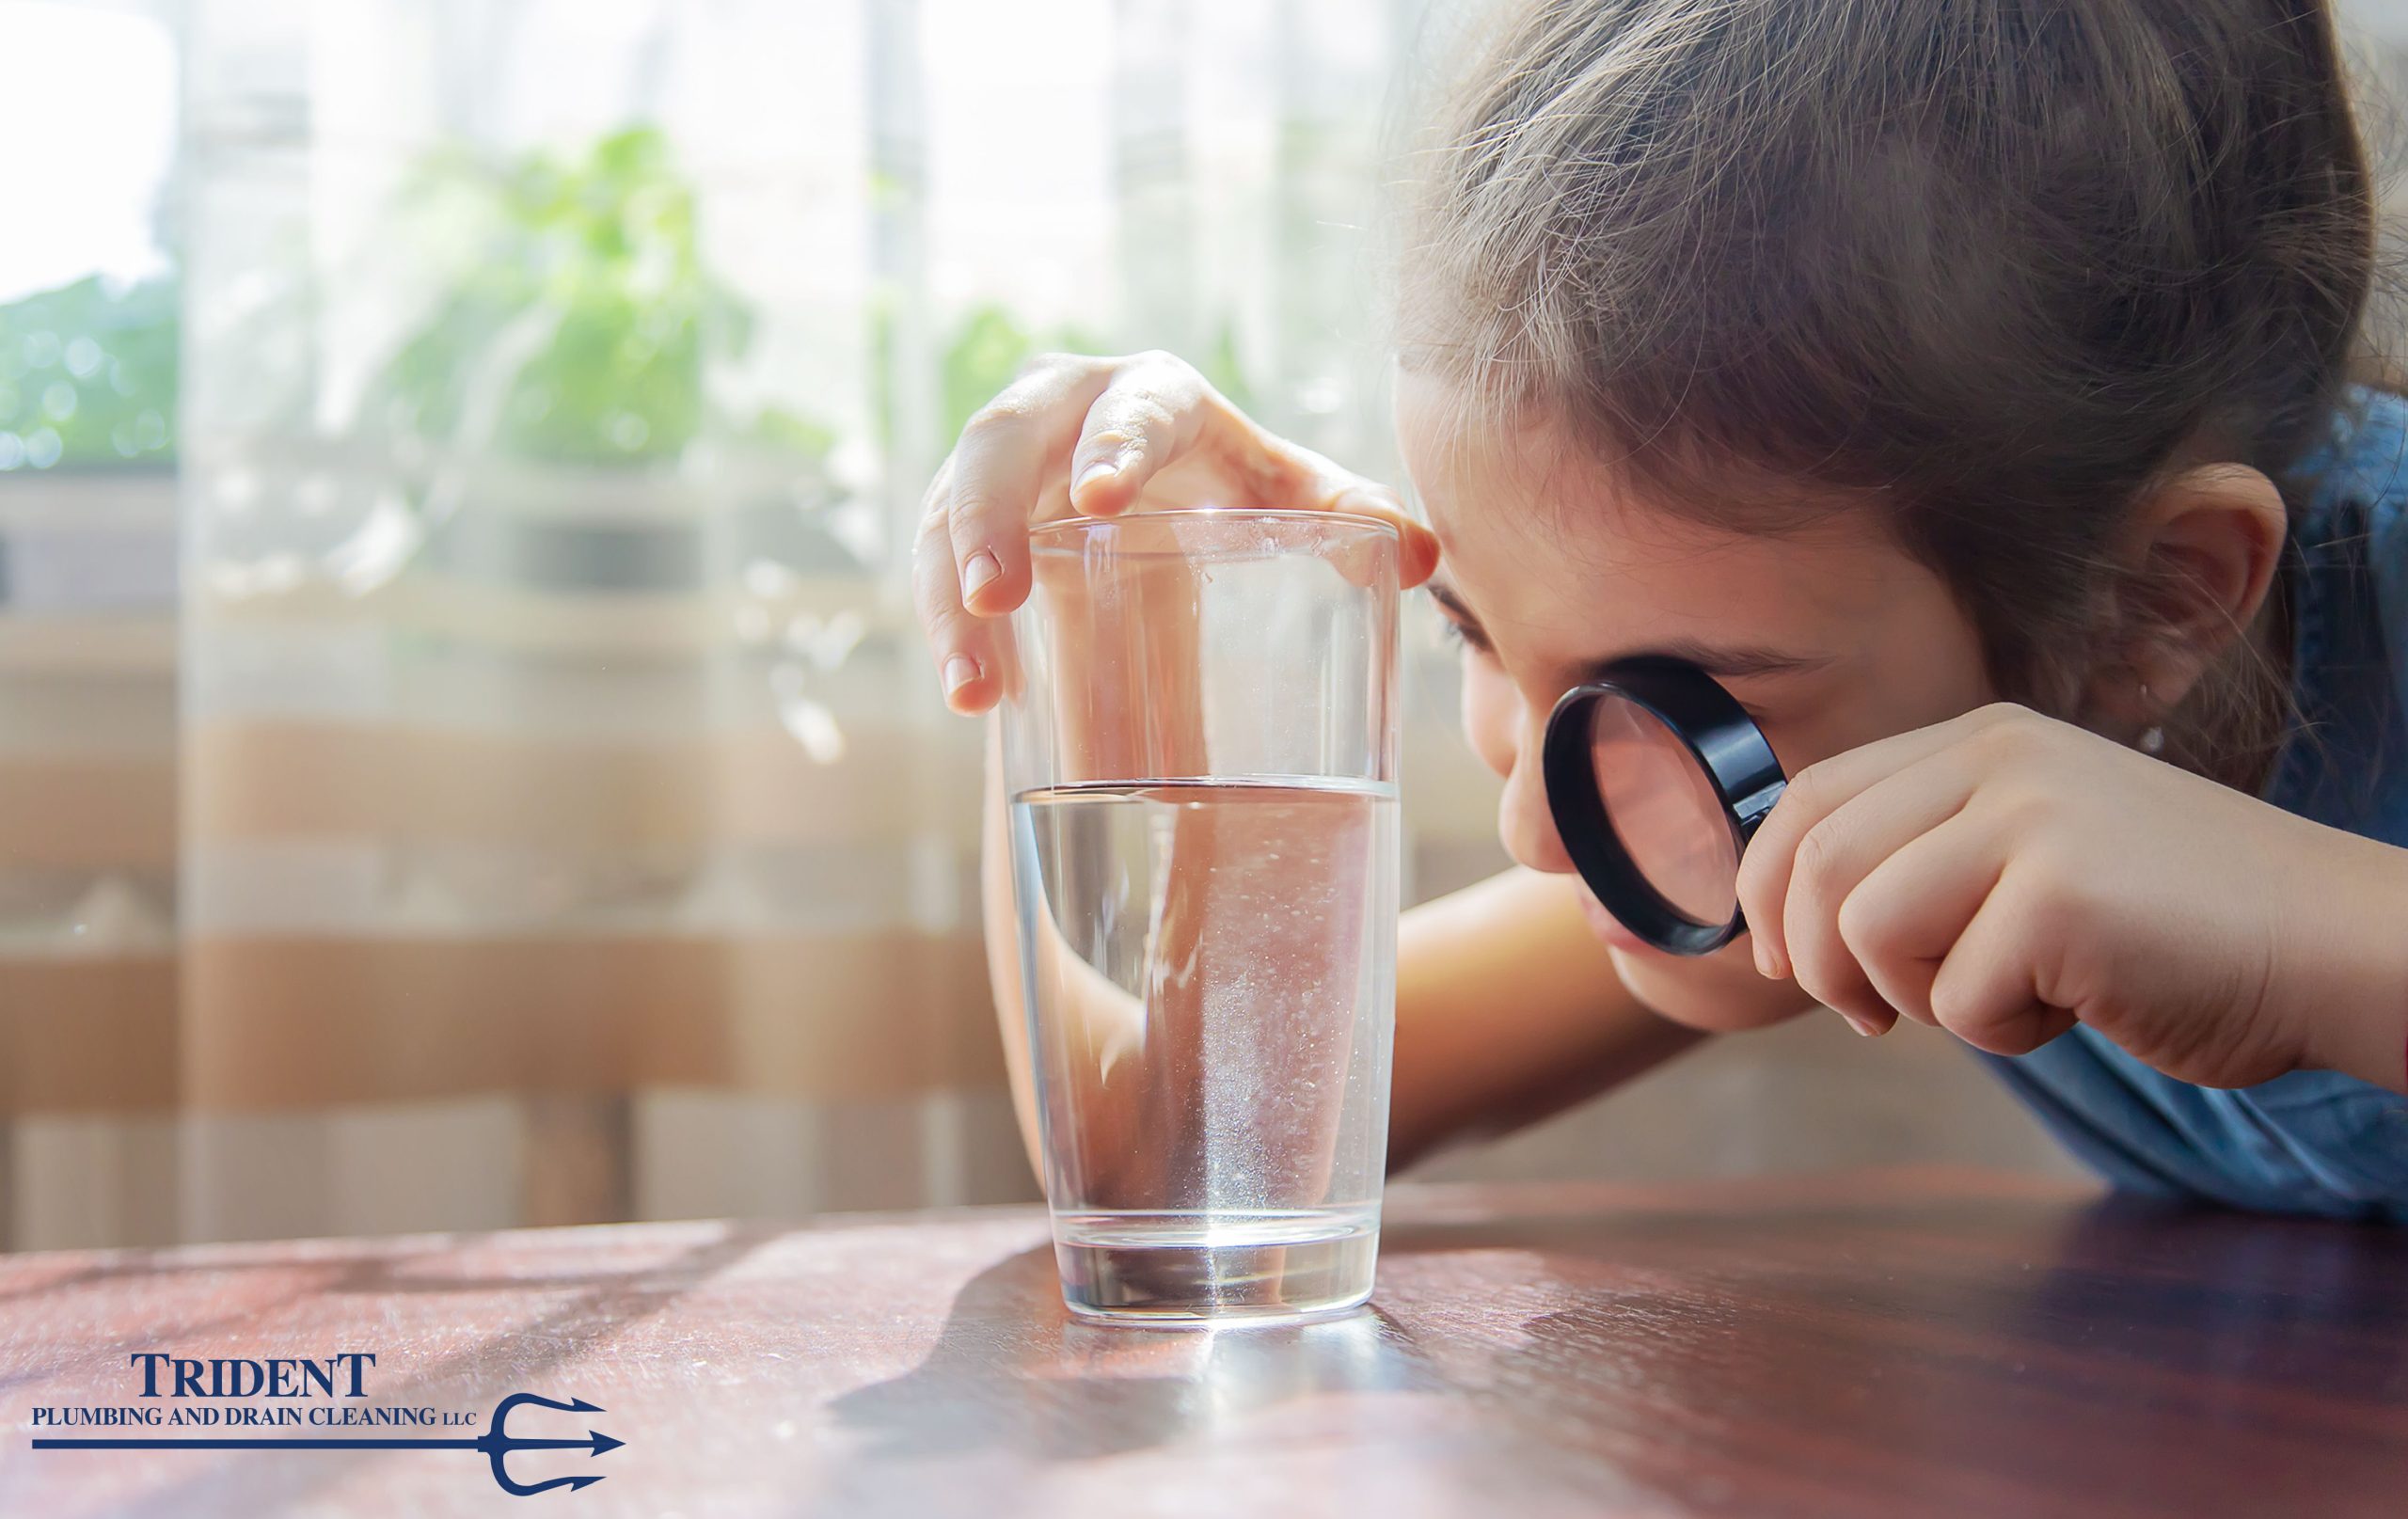 Is A Water Filtration System Worth The Investment?